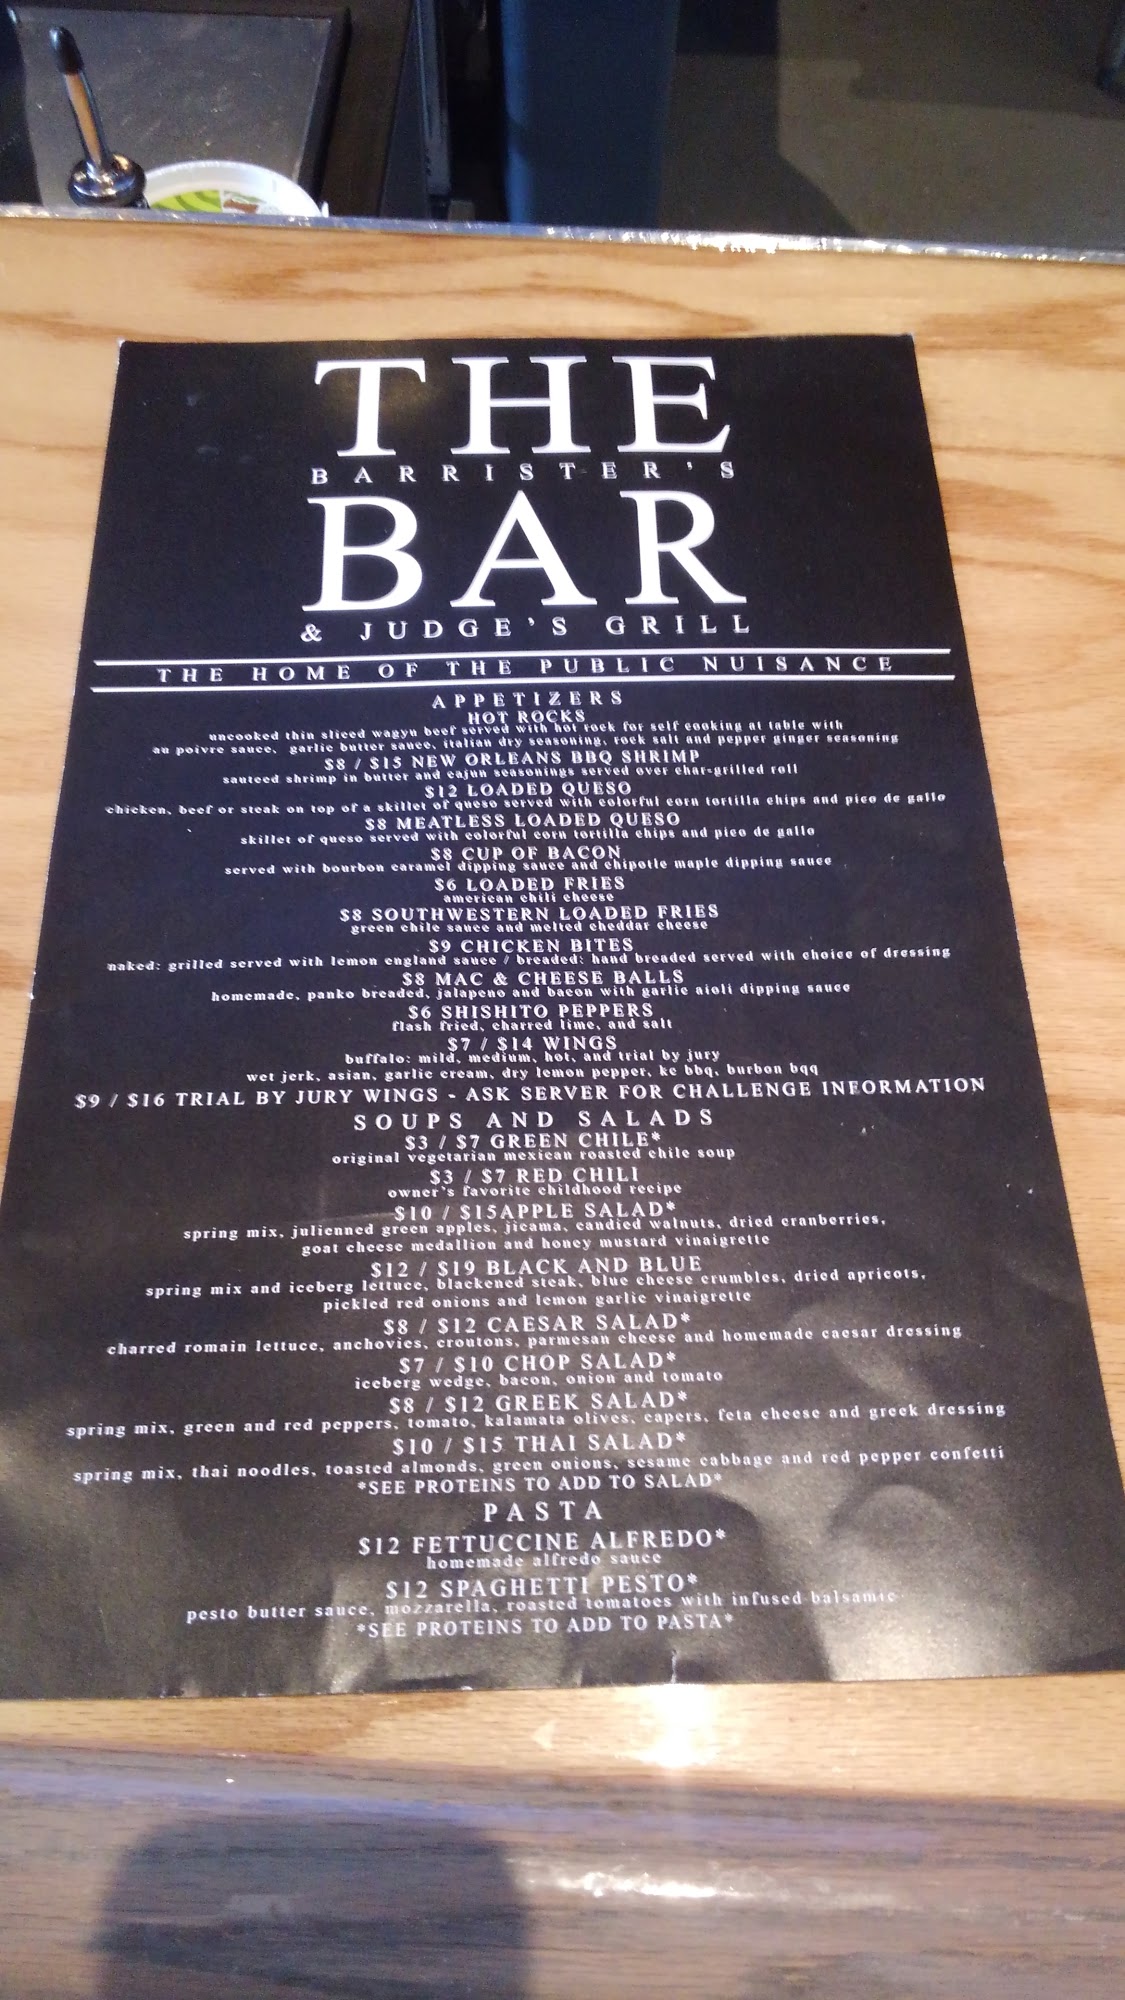 The Barrister's Bar & Judge's Grill